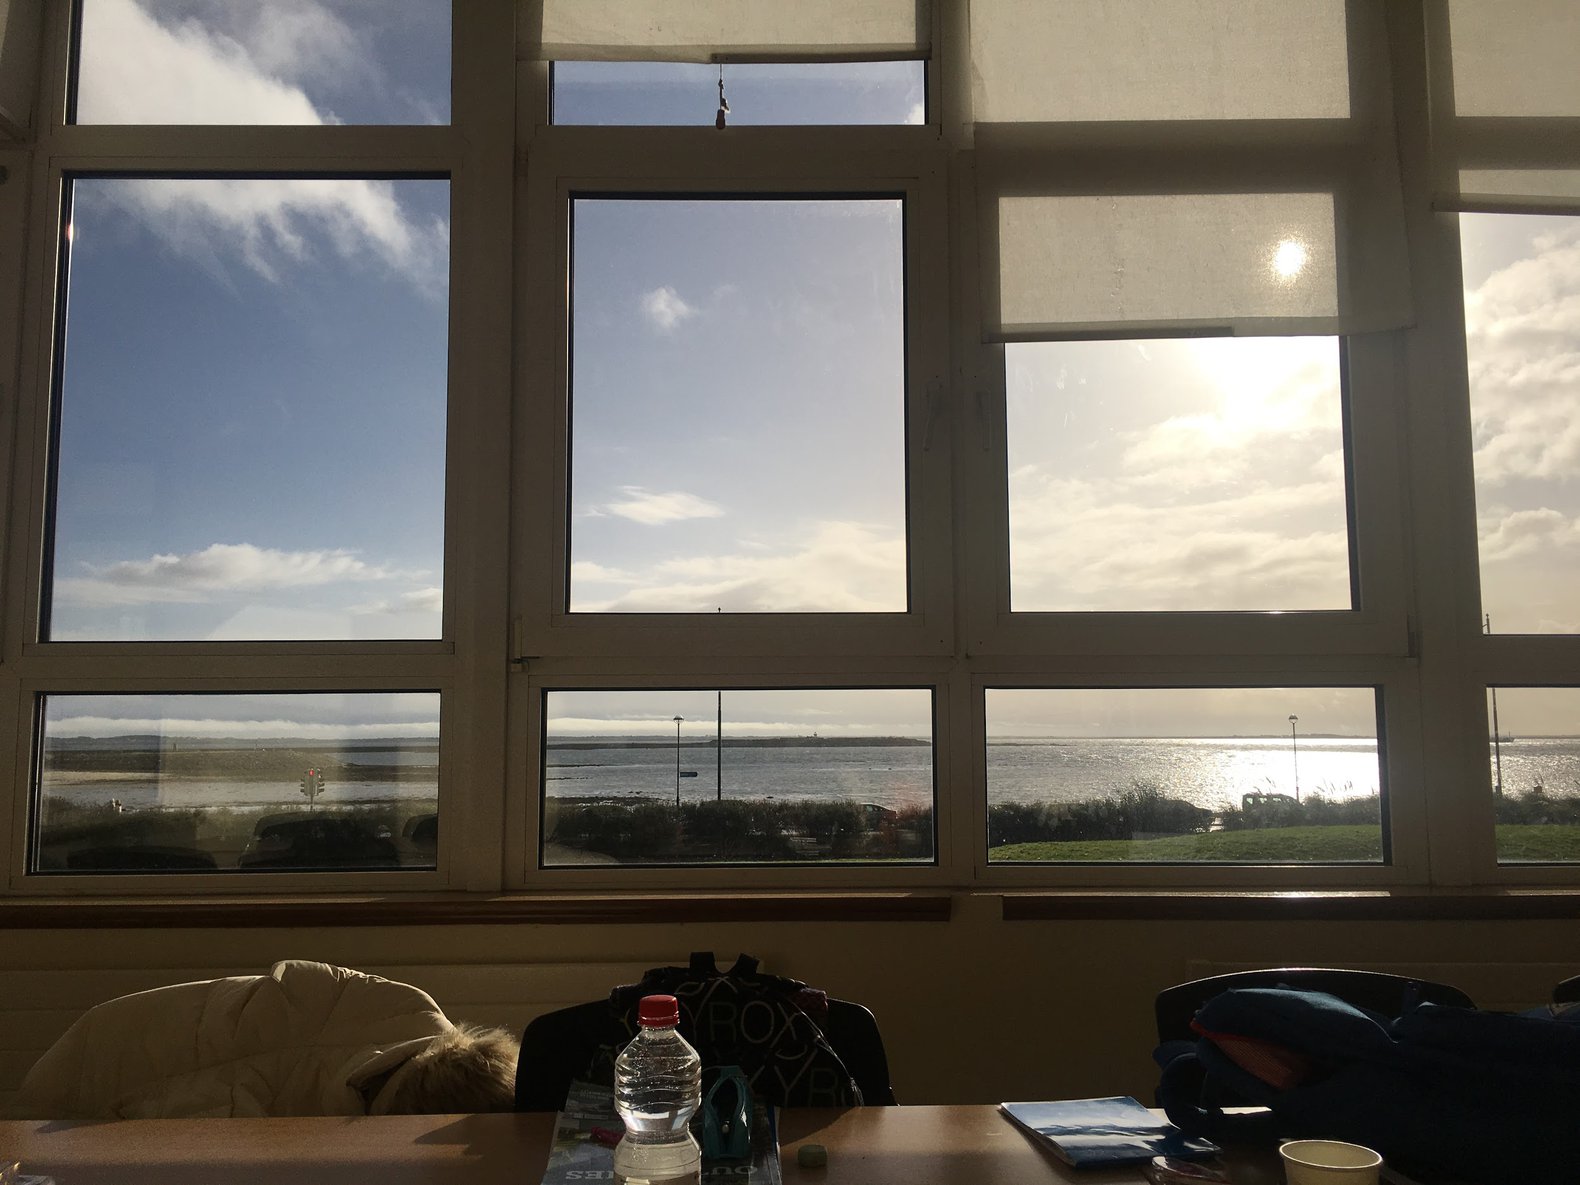 View from the classroom